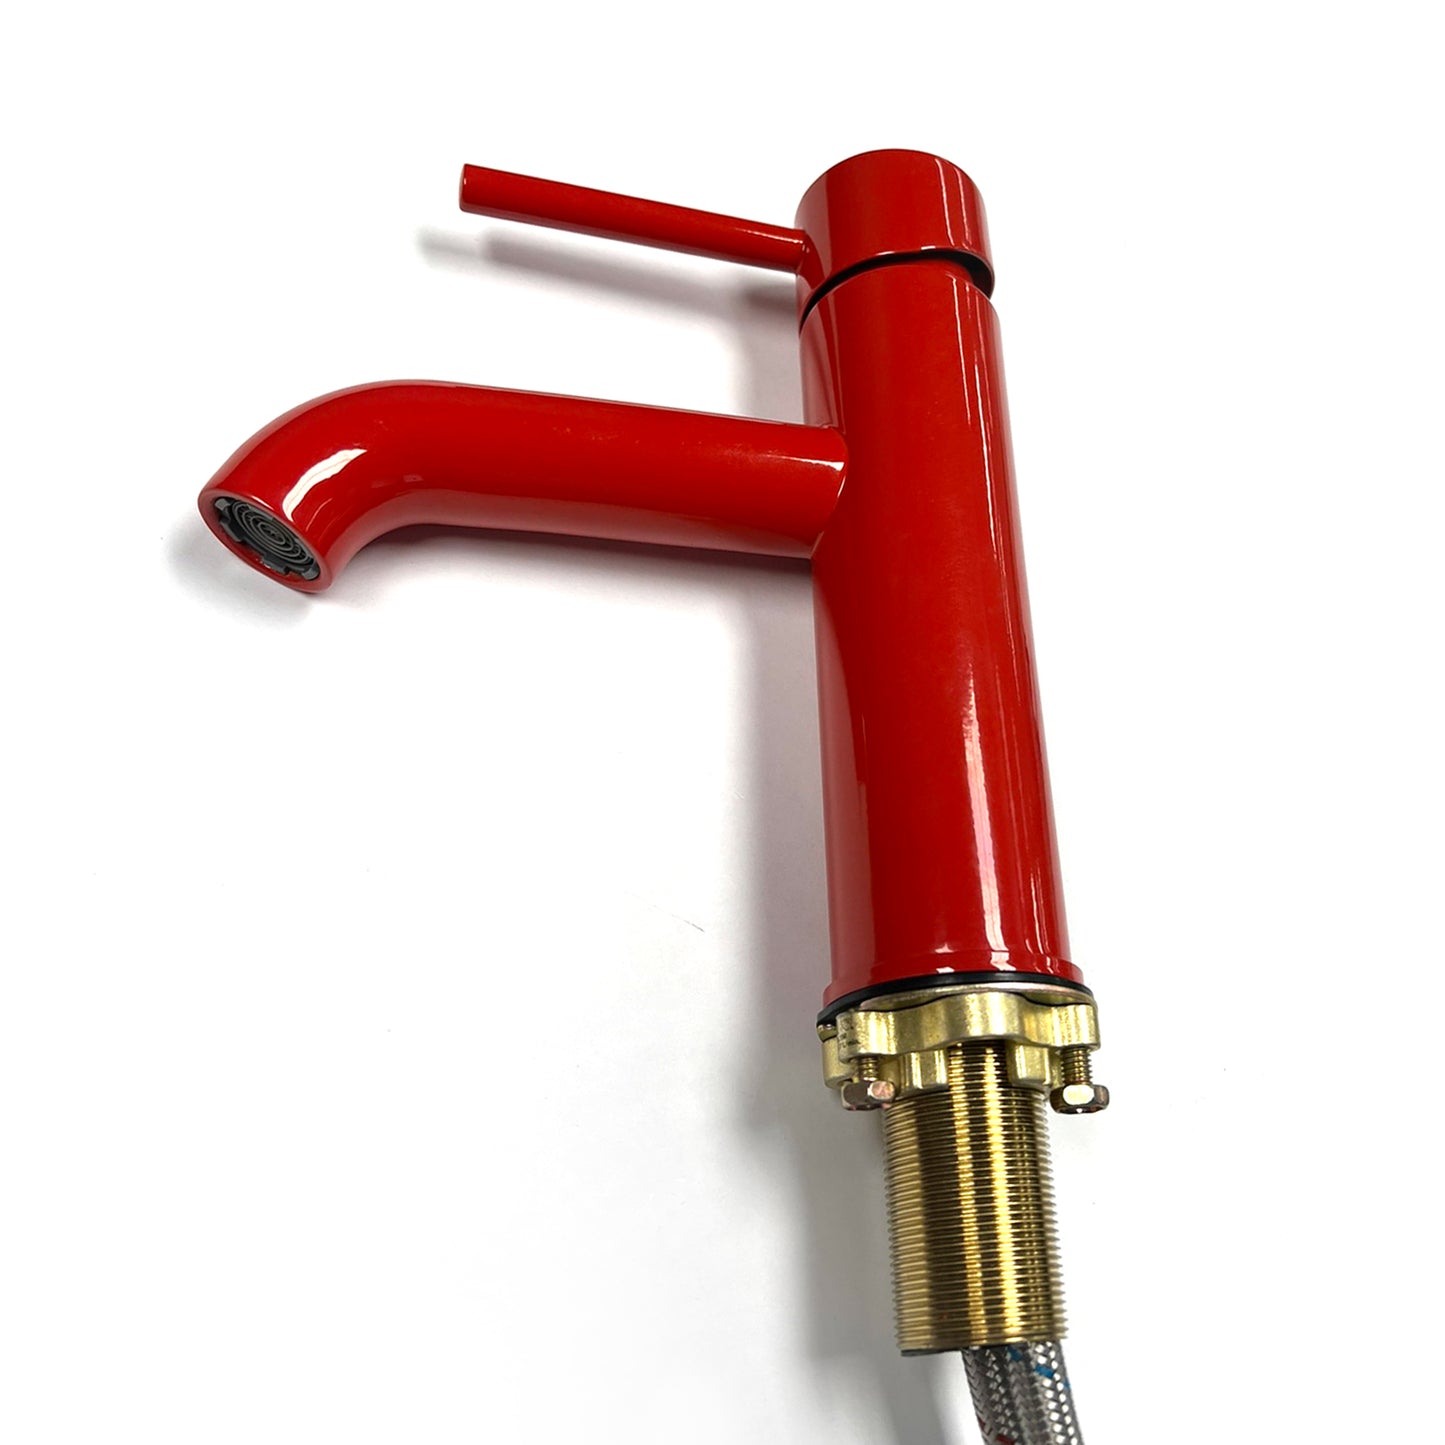 8877-RED - Contempo Single Hole Bathroom Faucet - Red